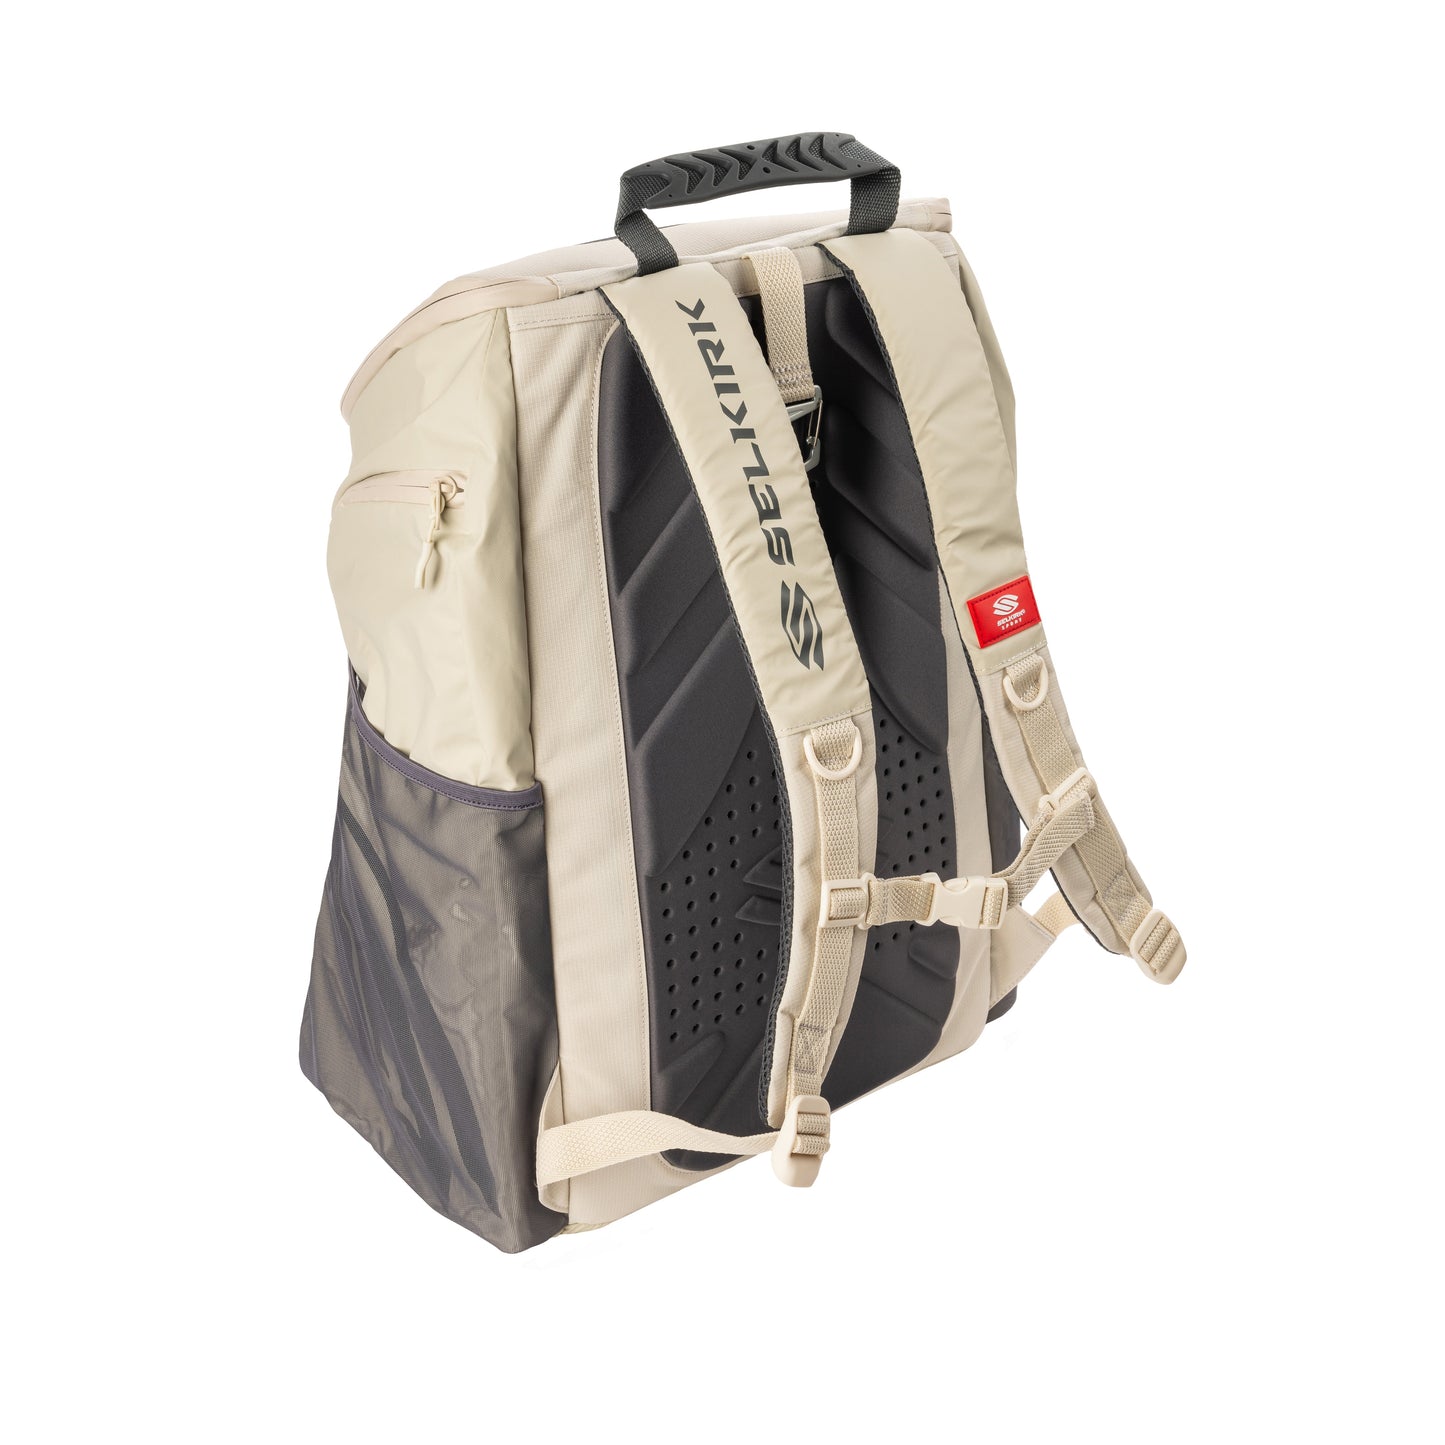 Pro Line Tour Bag by Selkirk Sport